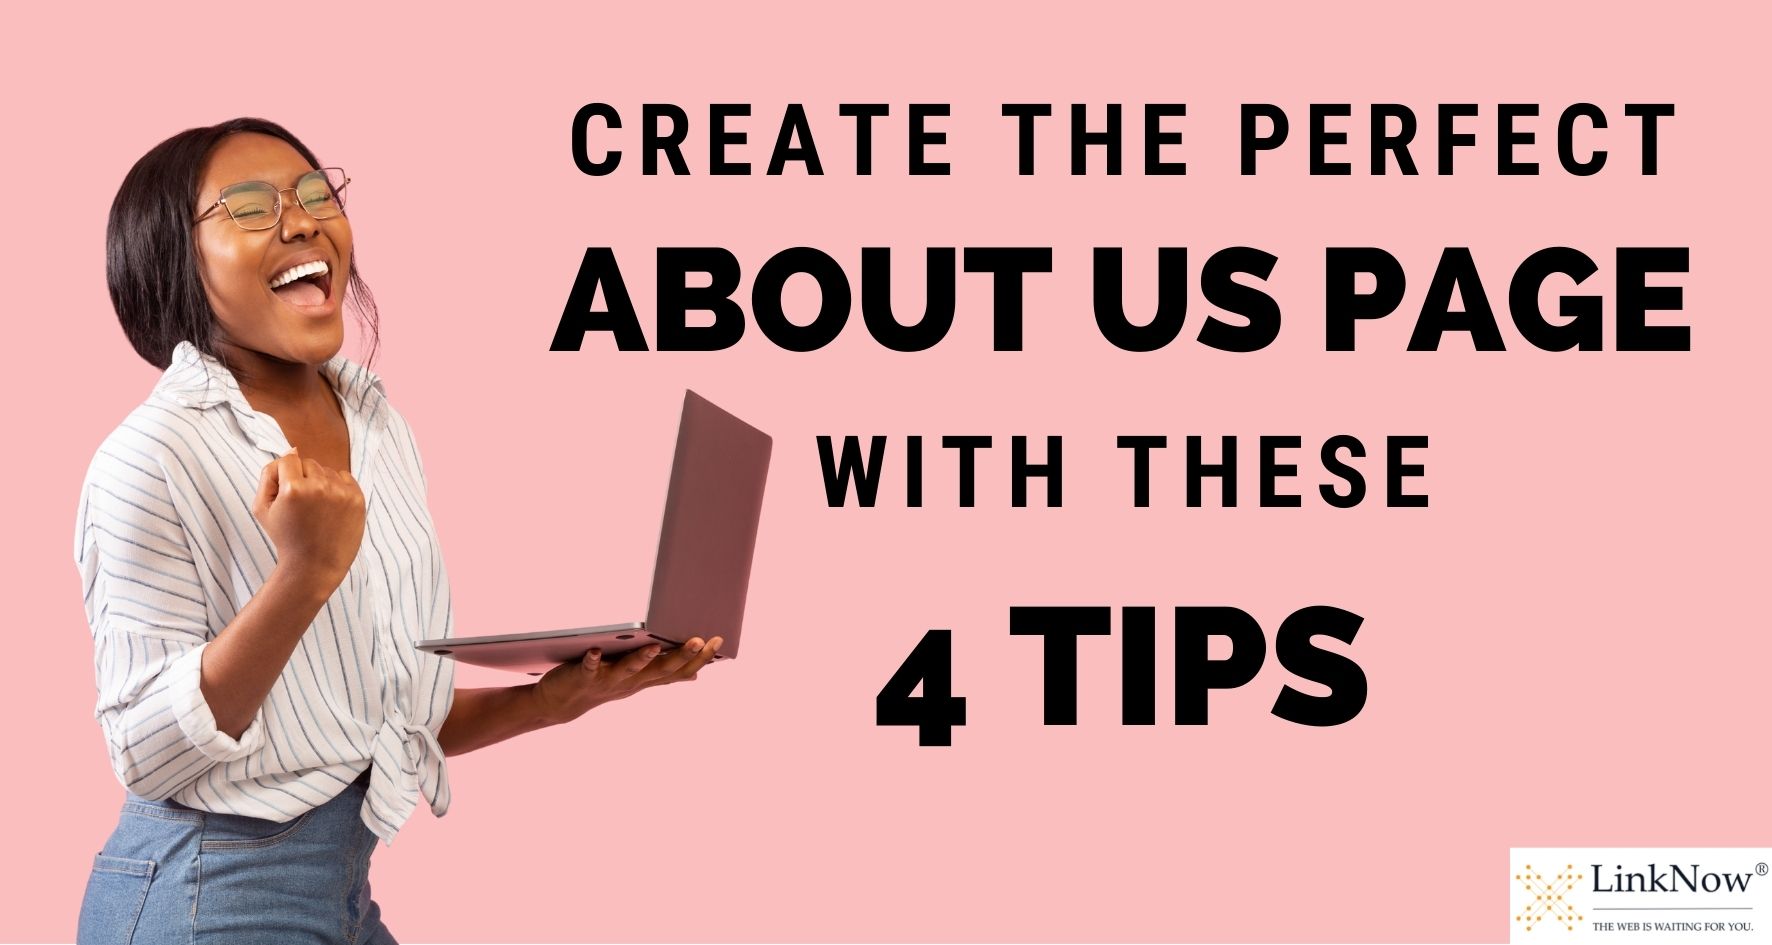 Woman with laptop raises arm in celebration. Text says: Create the perfect About Us page with these 4 tips.